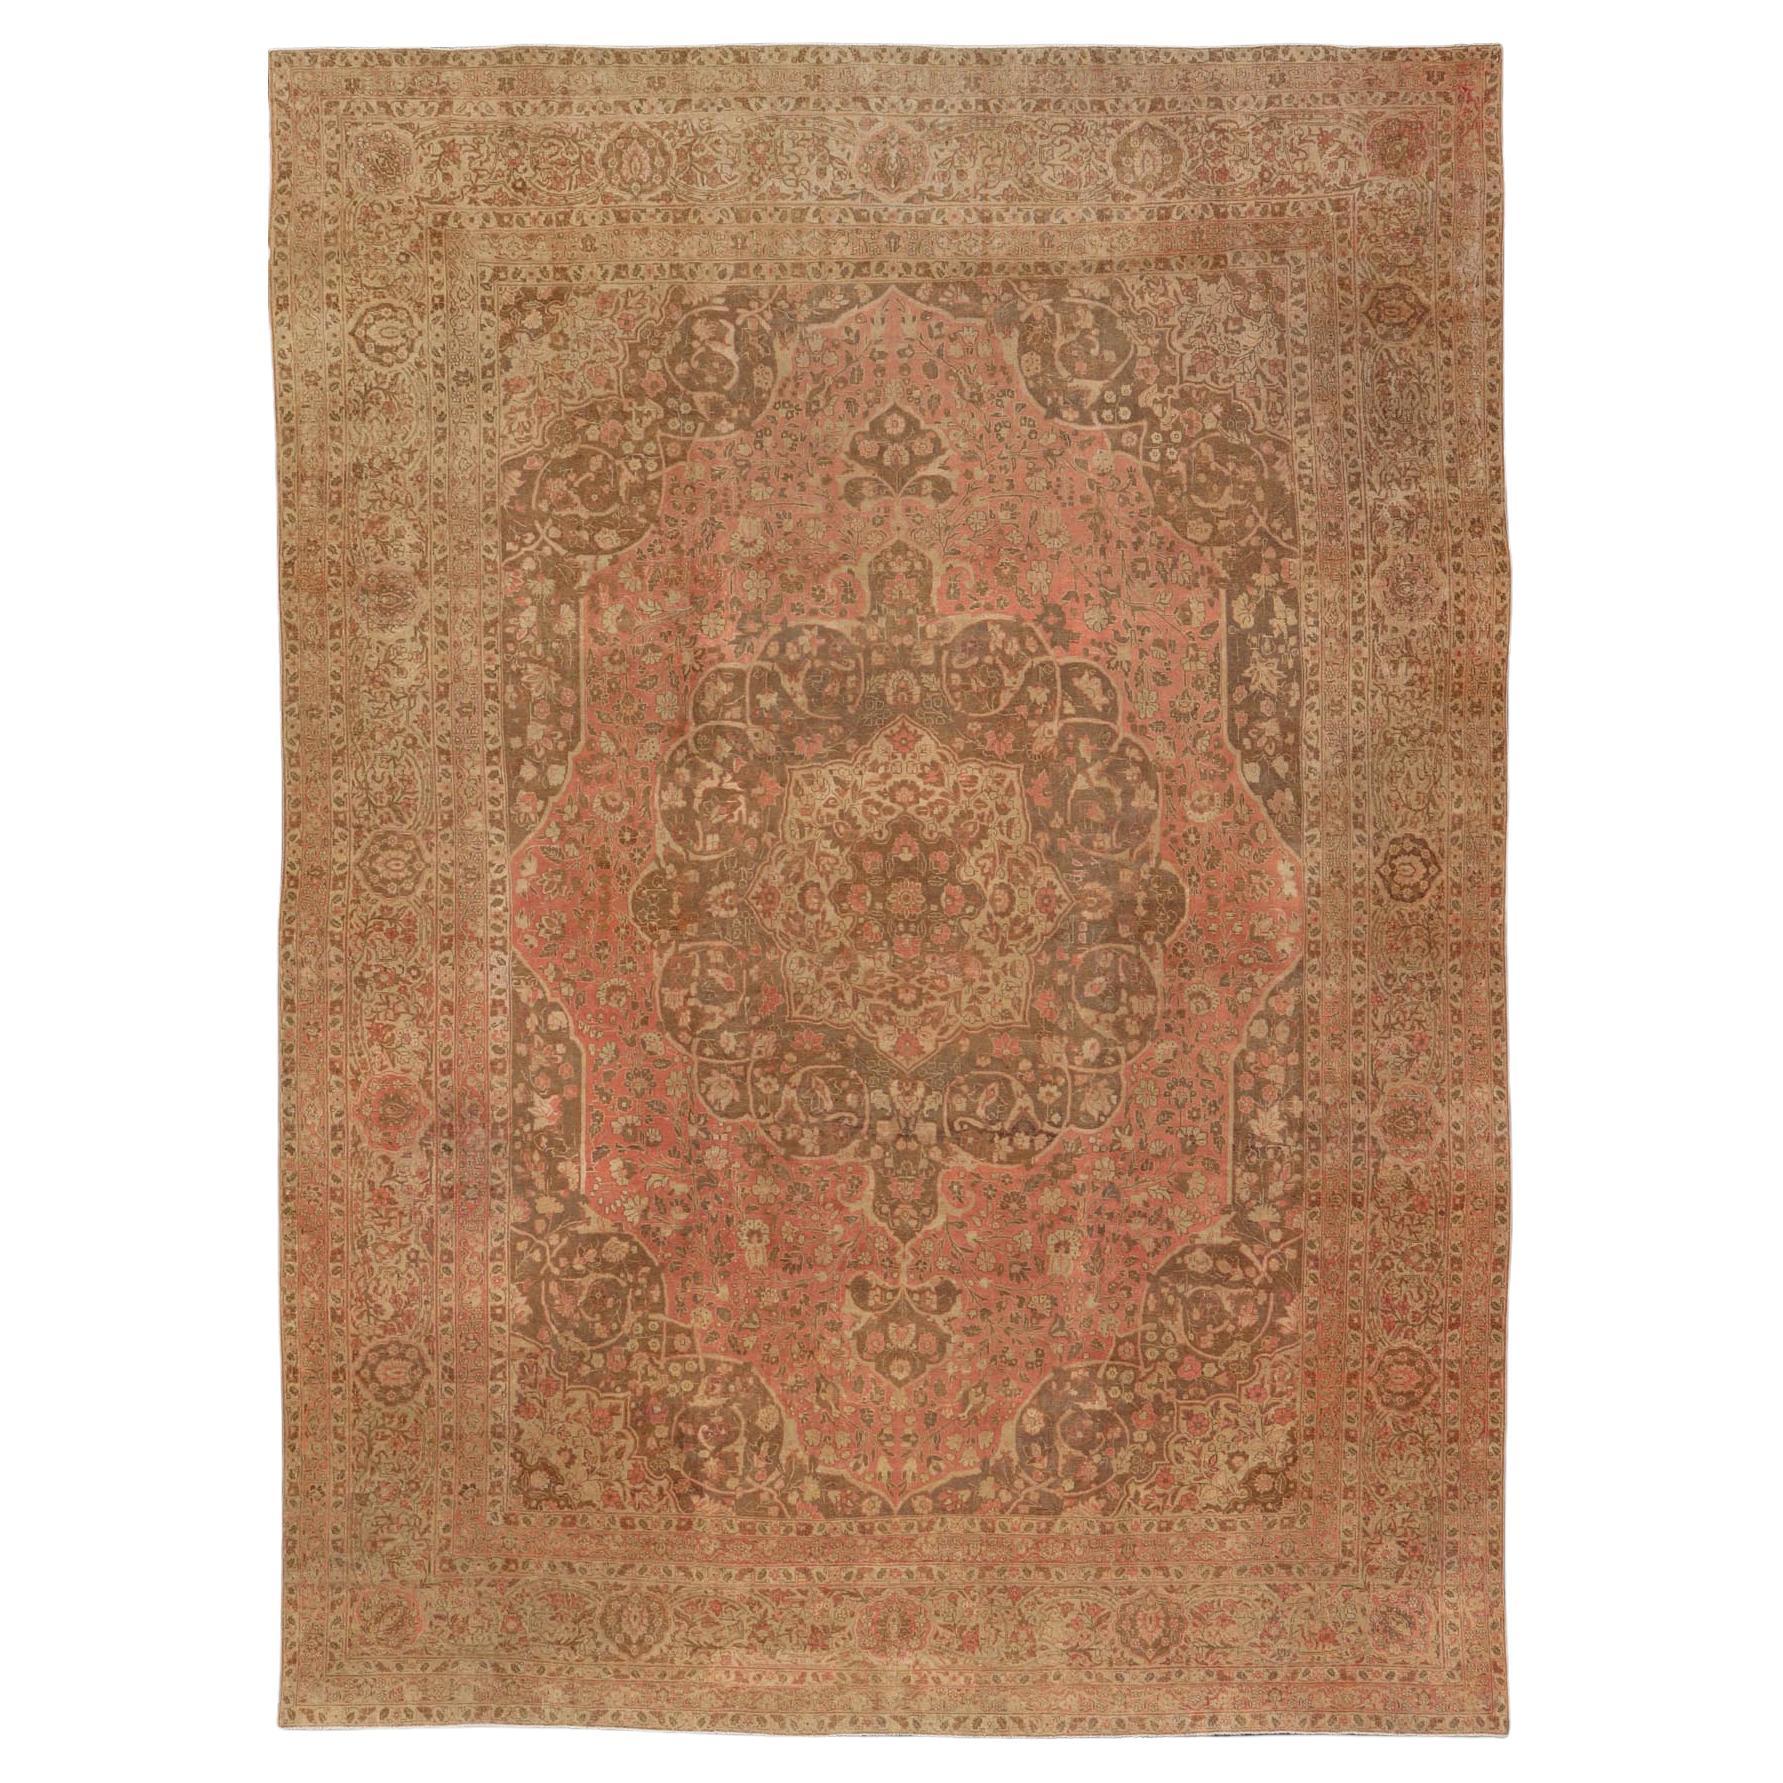 Antique Medallion Tabriz Carpet in Pink, Light Brown, Camel, Taupe, and Salmon For Sale